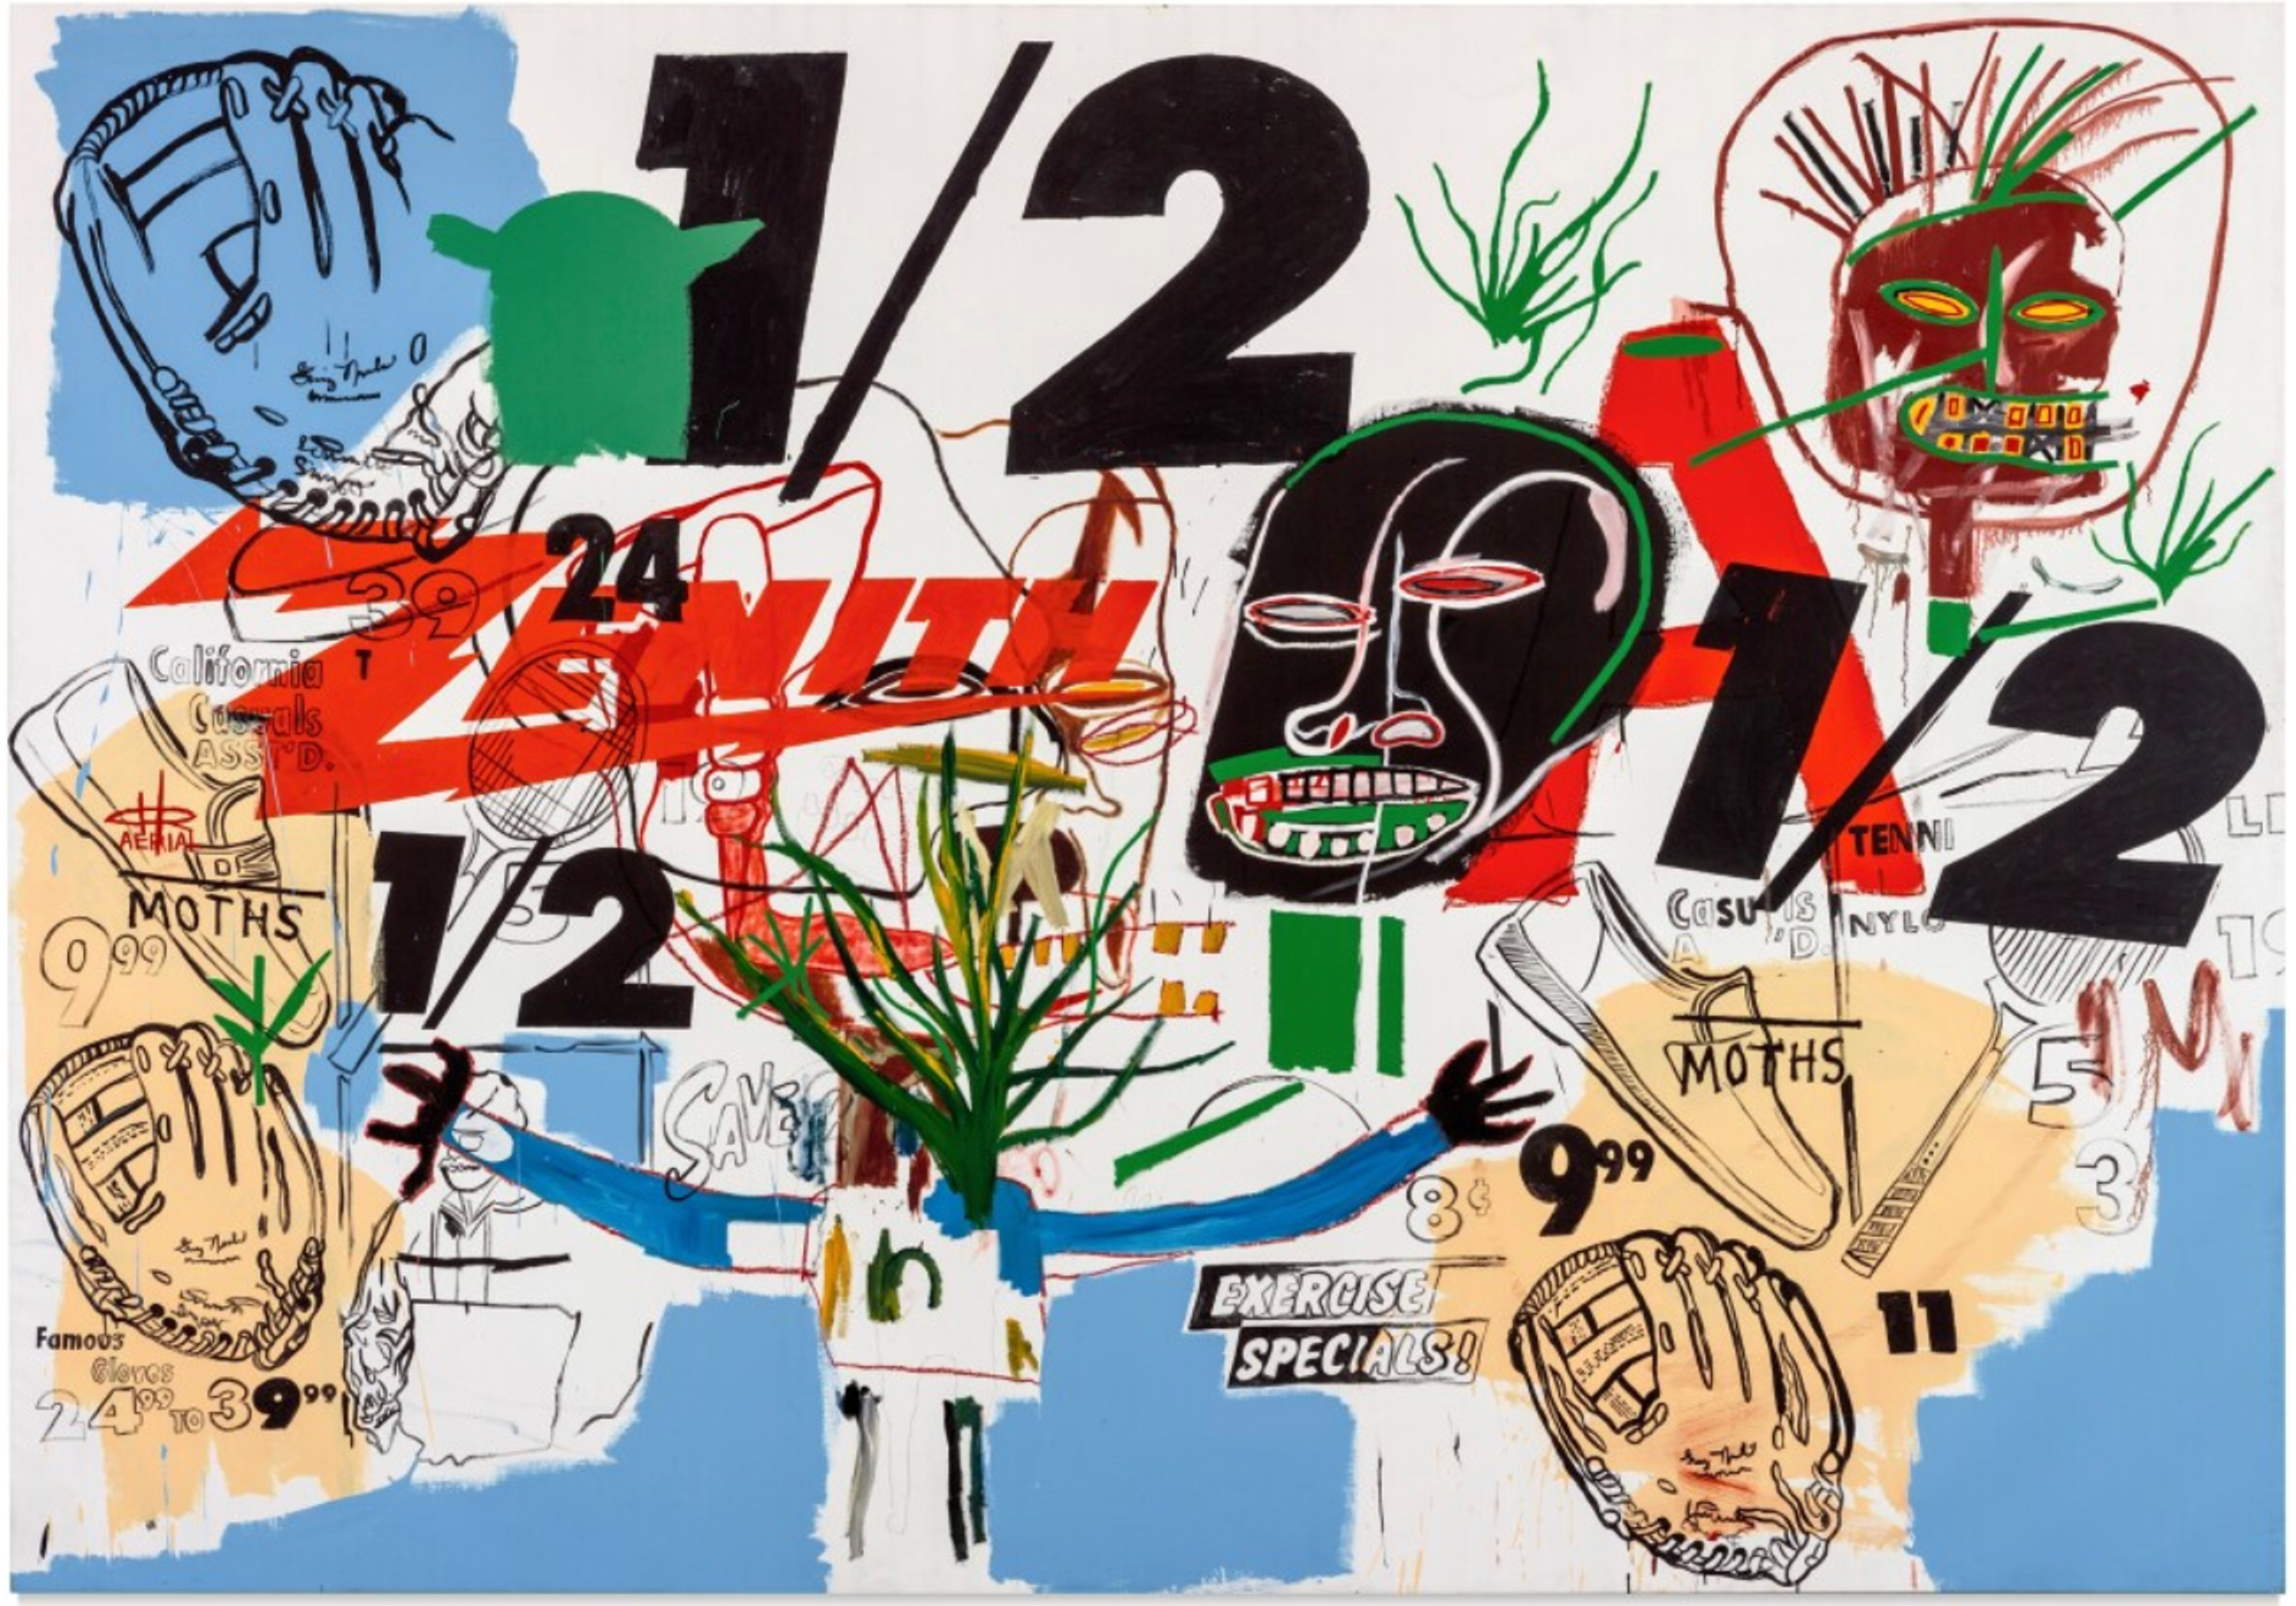 A large-scale white canvas features abstract colours of beige and blue with collage-like images of baseball mitts, human heads, skulls, and various numbers, alongside the word 'Zenith'.